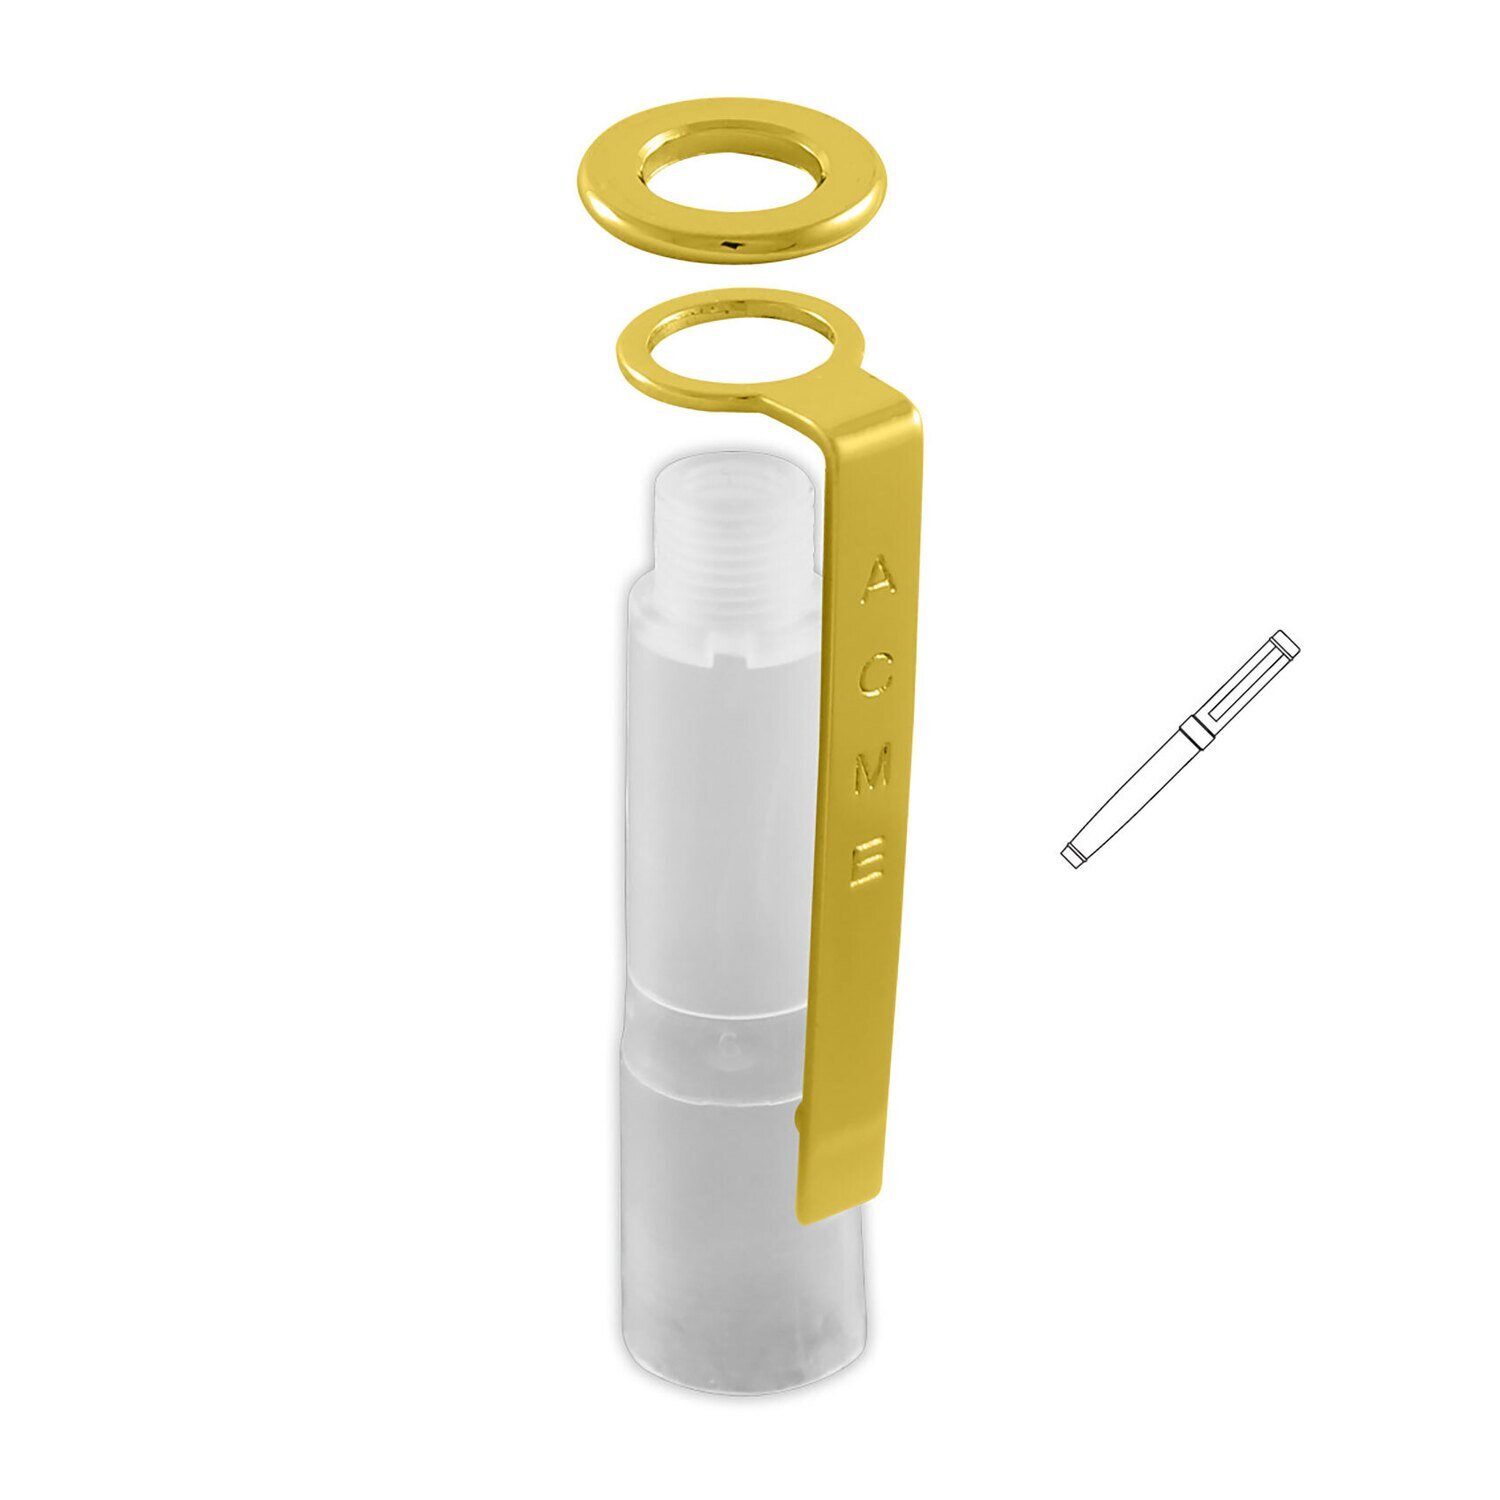 Acme Pushoff with Gold Washer & Clip For Standard Flat Top Roller Ball Pens ZPPUSHOFFWCFG